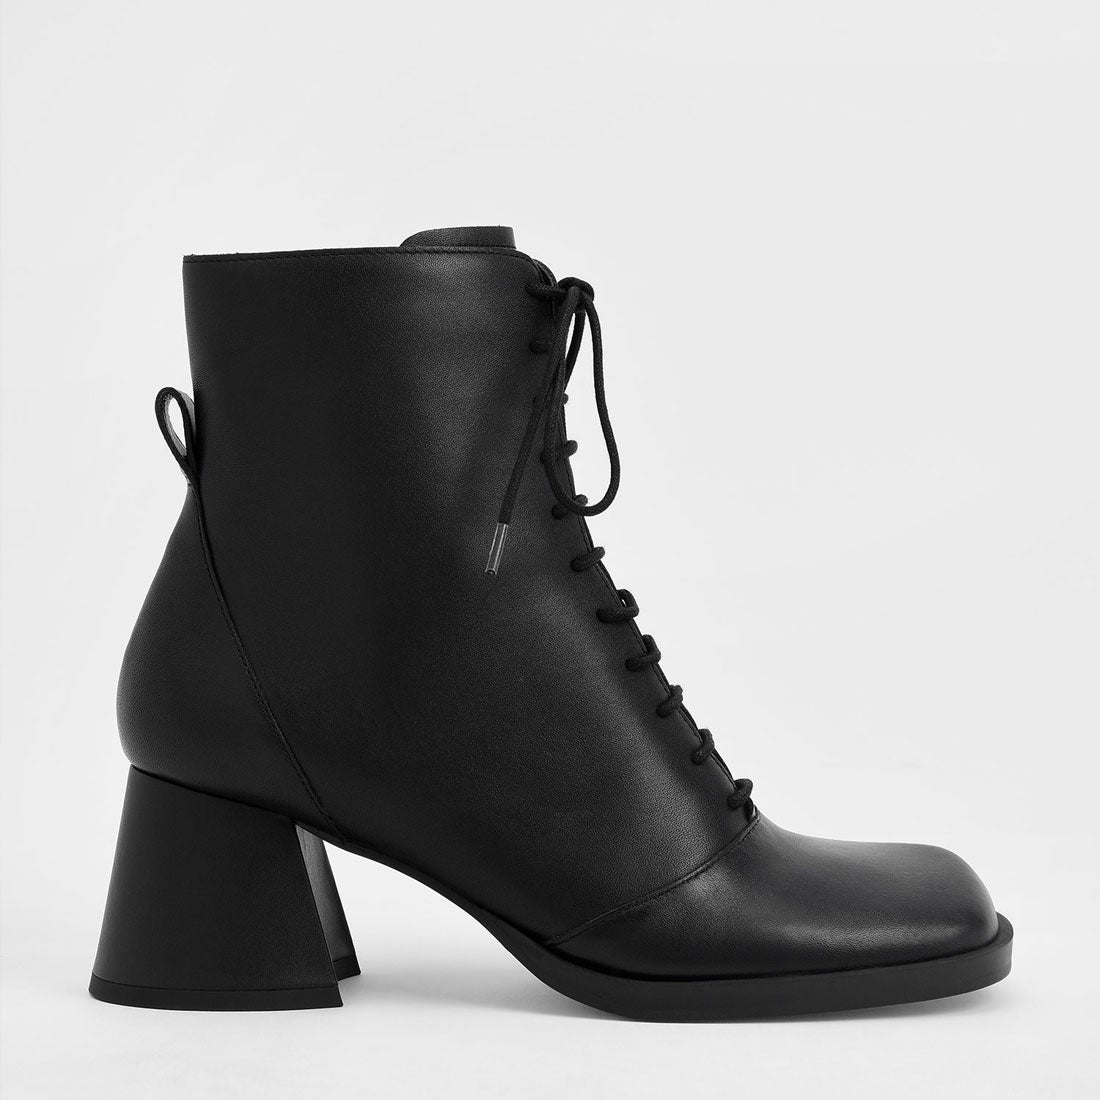 【2021 WINTER】レザーレースアップ アンクルブーツ / Leather Lace-Up Ankle Boots （Black）